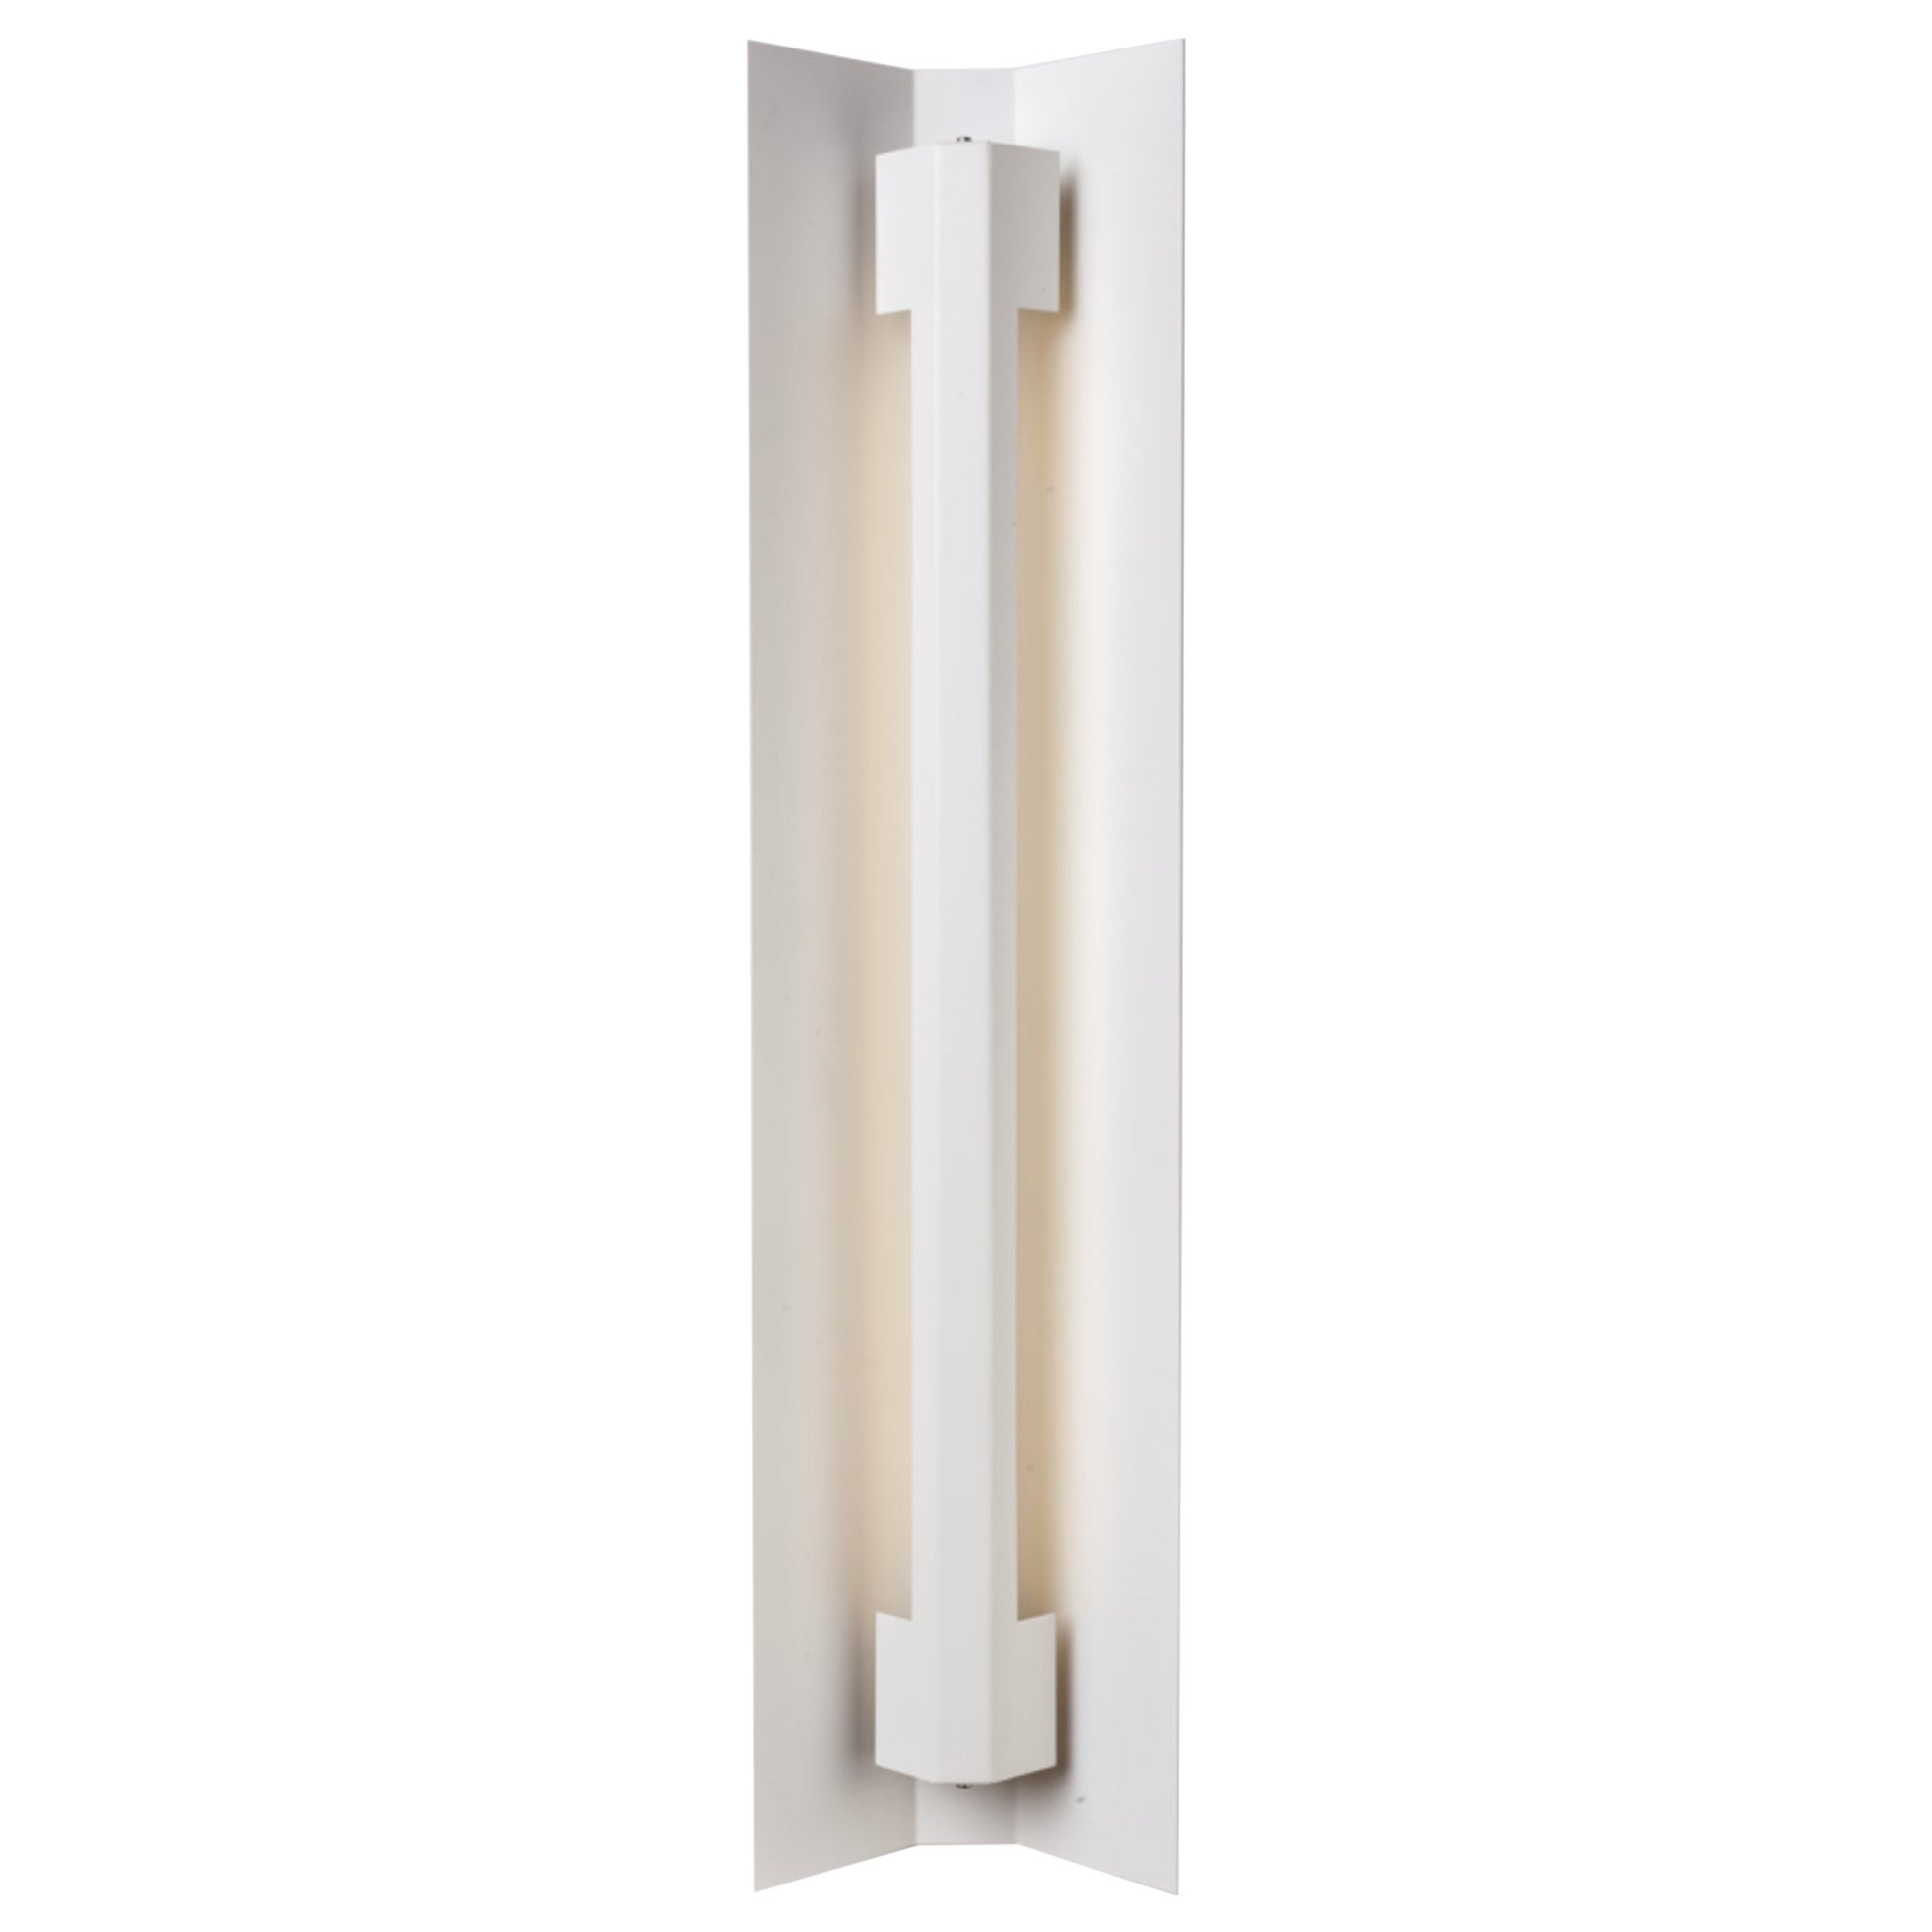 Extra Large Misalliance Ral Pure White Wall Light by Lexavala